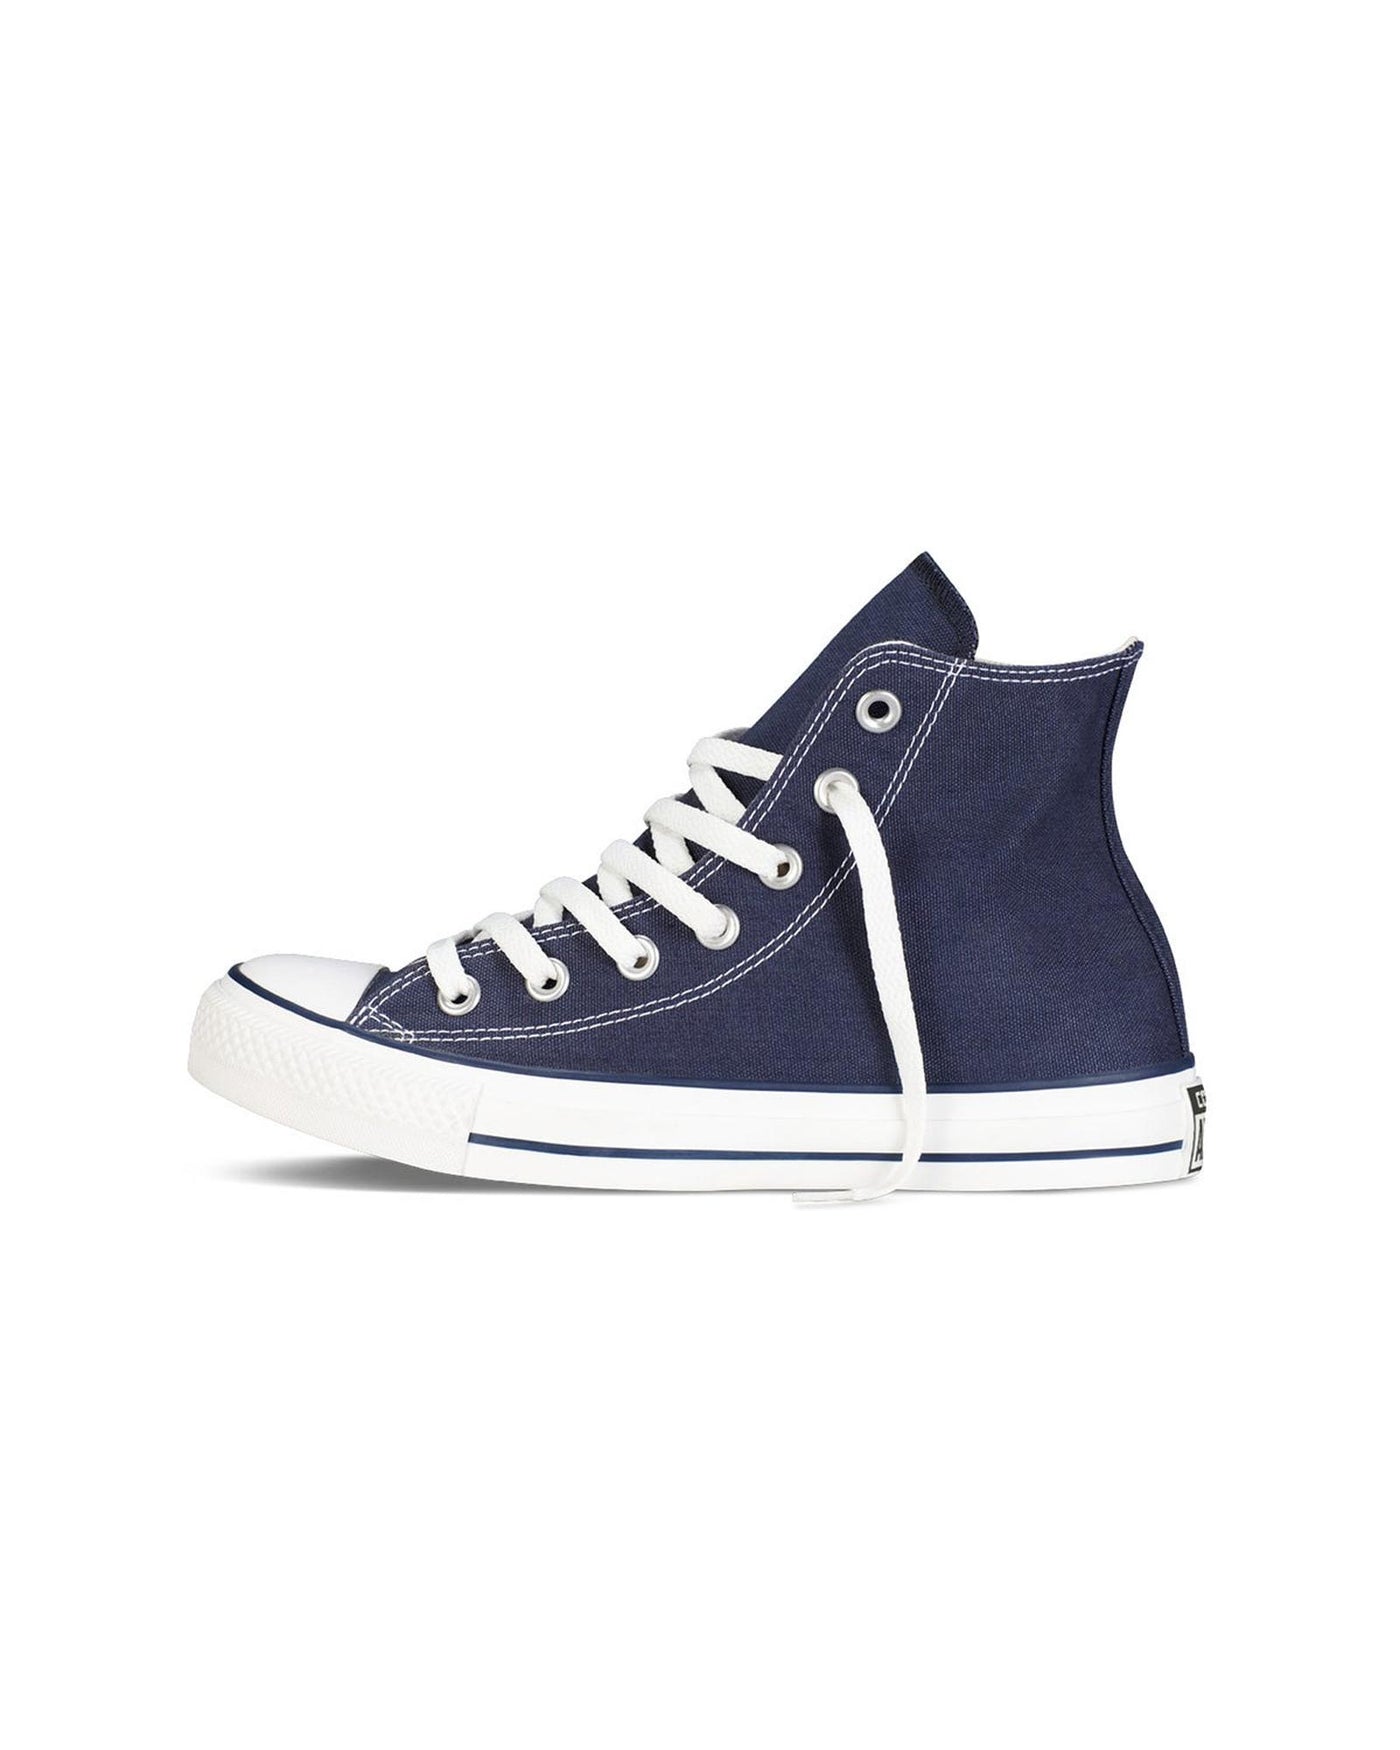 Classic Canvas High-Top Sneaker - 9 US